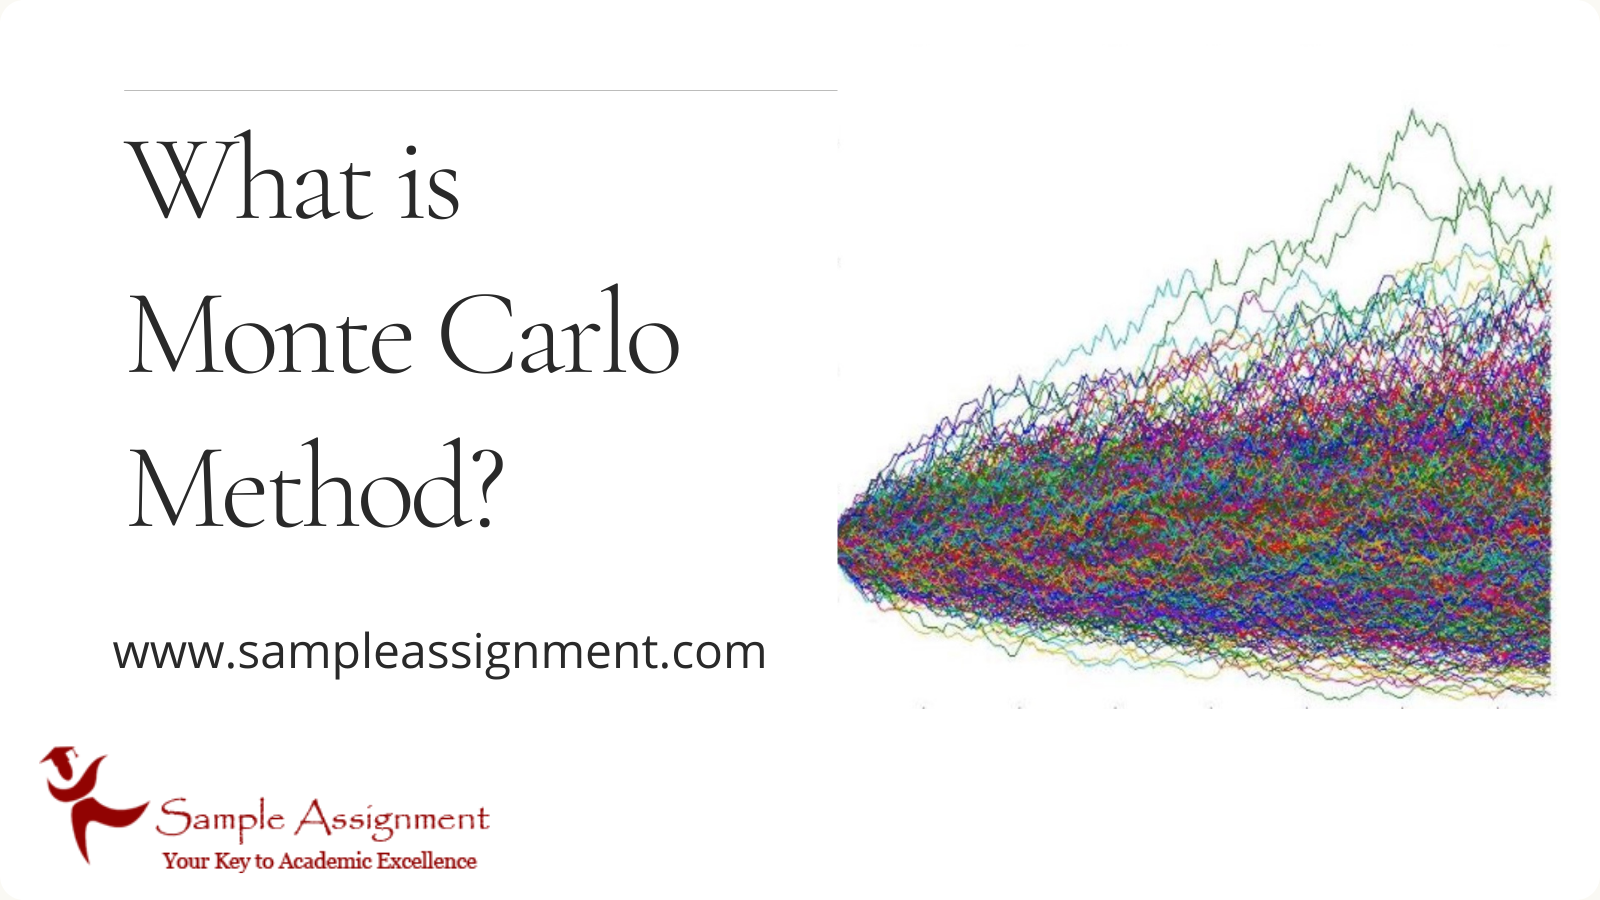 What is Monte Carlo Method?